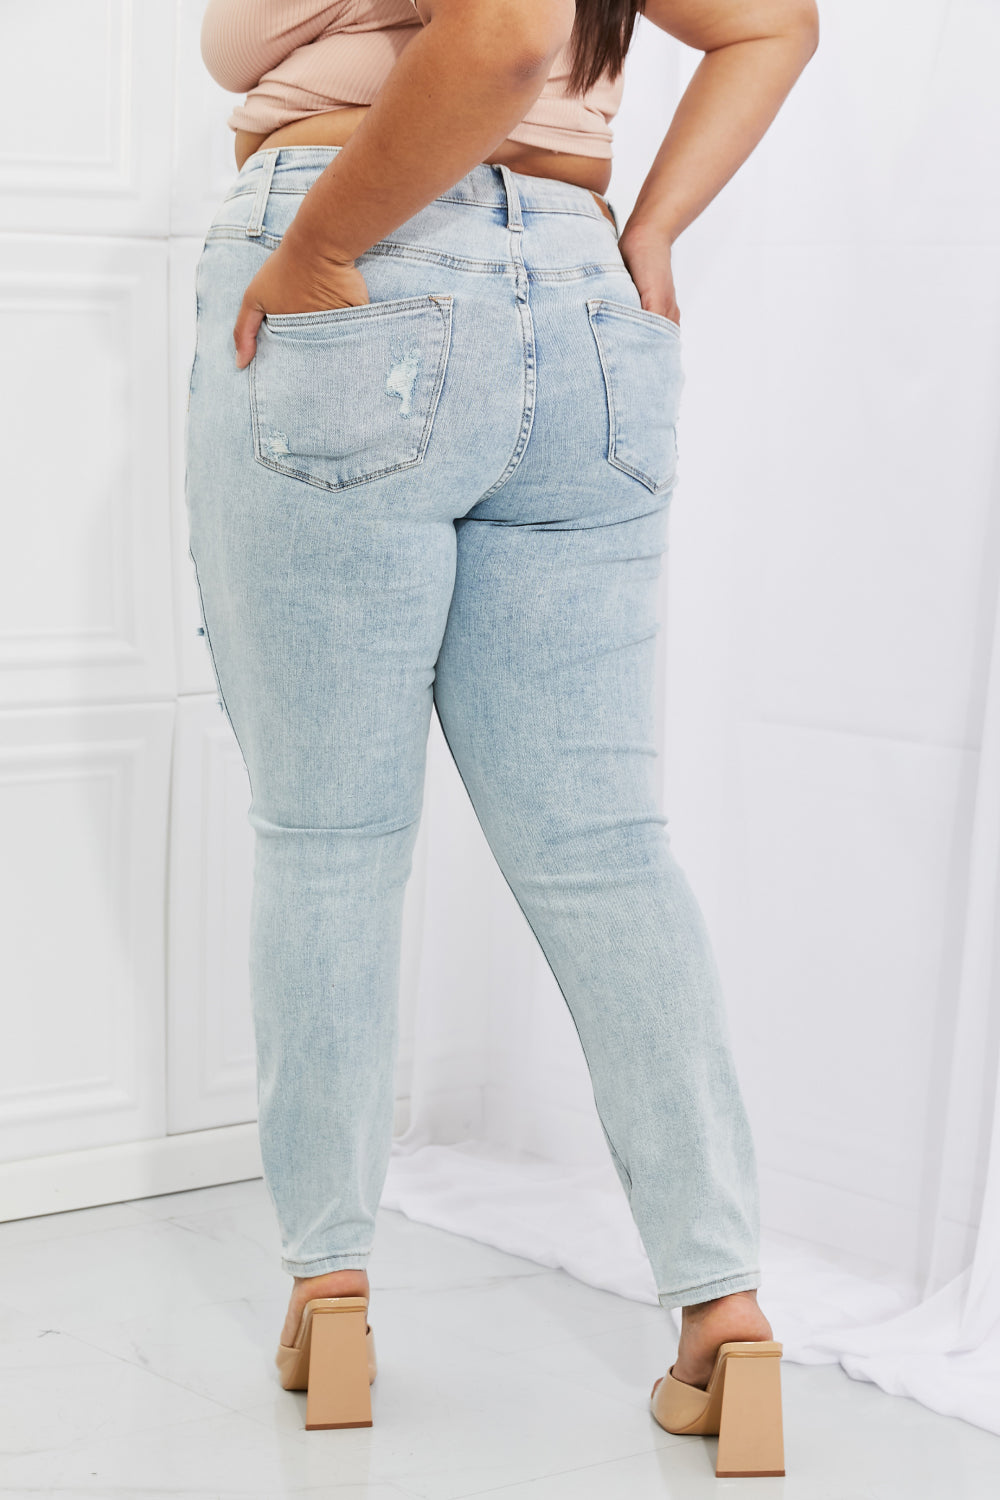 Back View, Plus Size, Judy Blue, High Rise Destroyed Tummy Control Skinny Jeans Style 88431